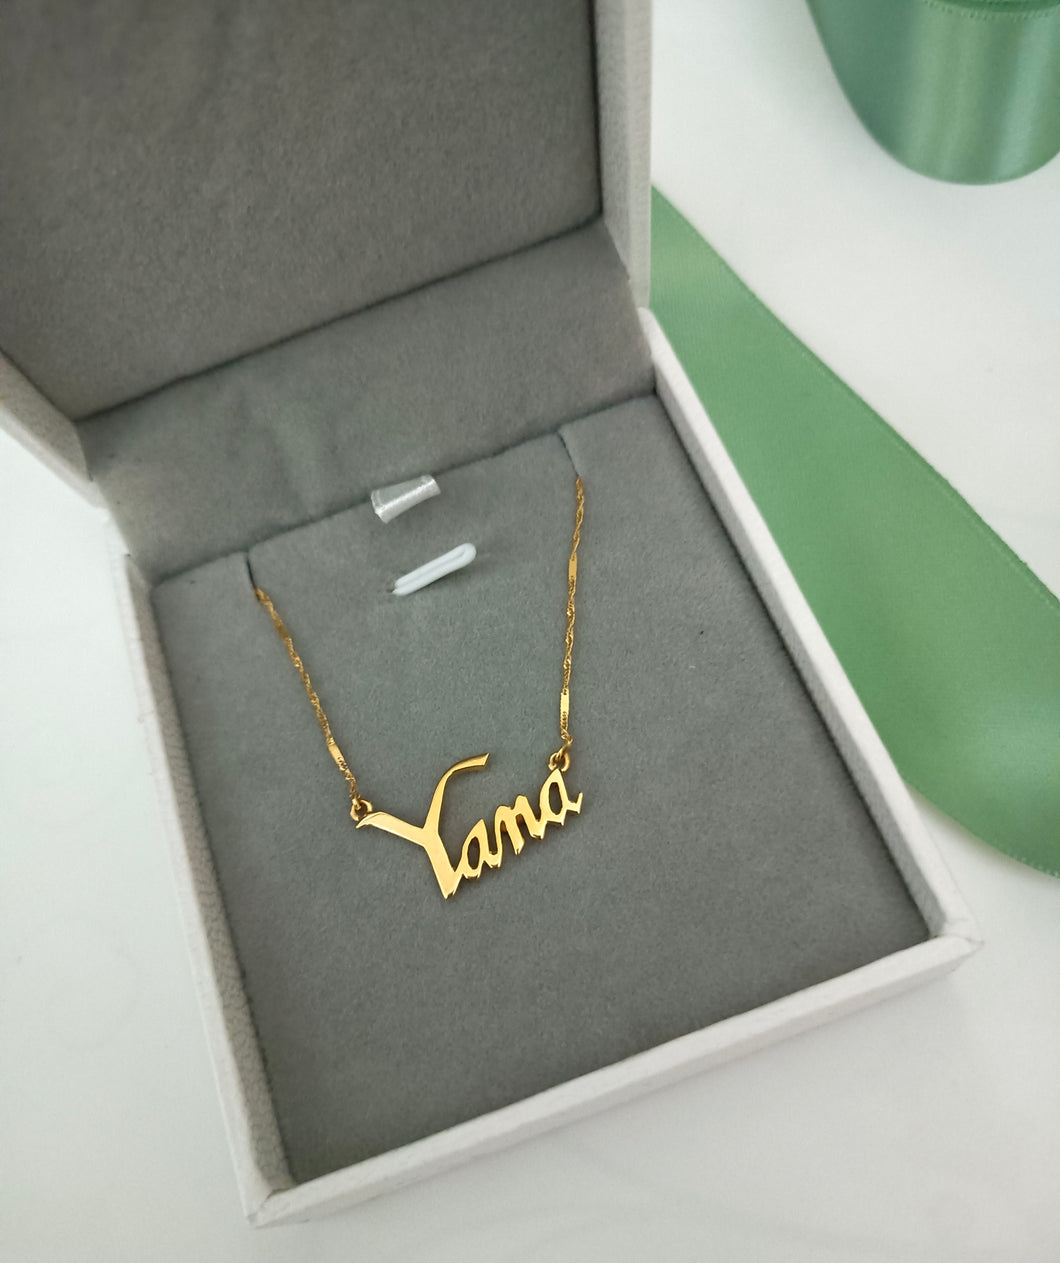 A Yana necklace in yellow gold with a twisted gold chain.